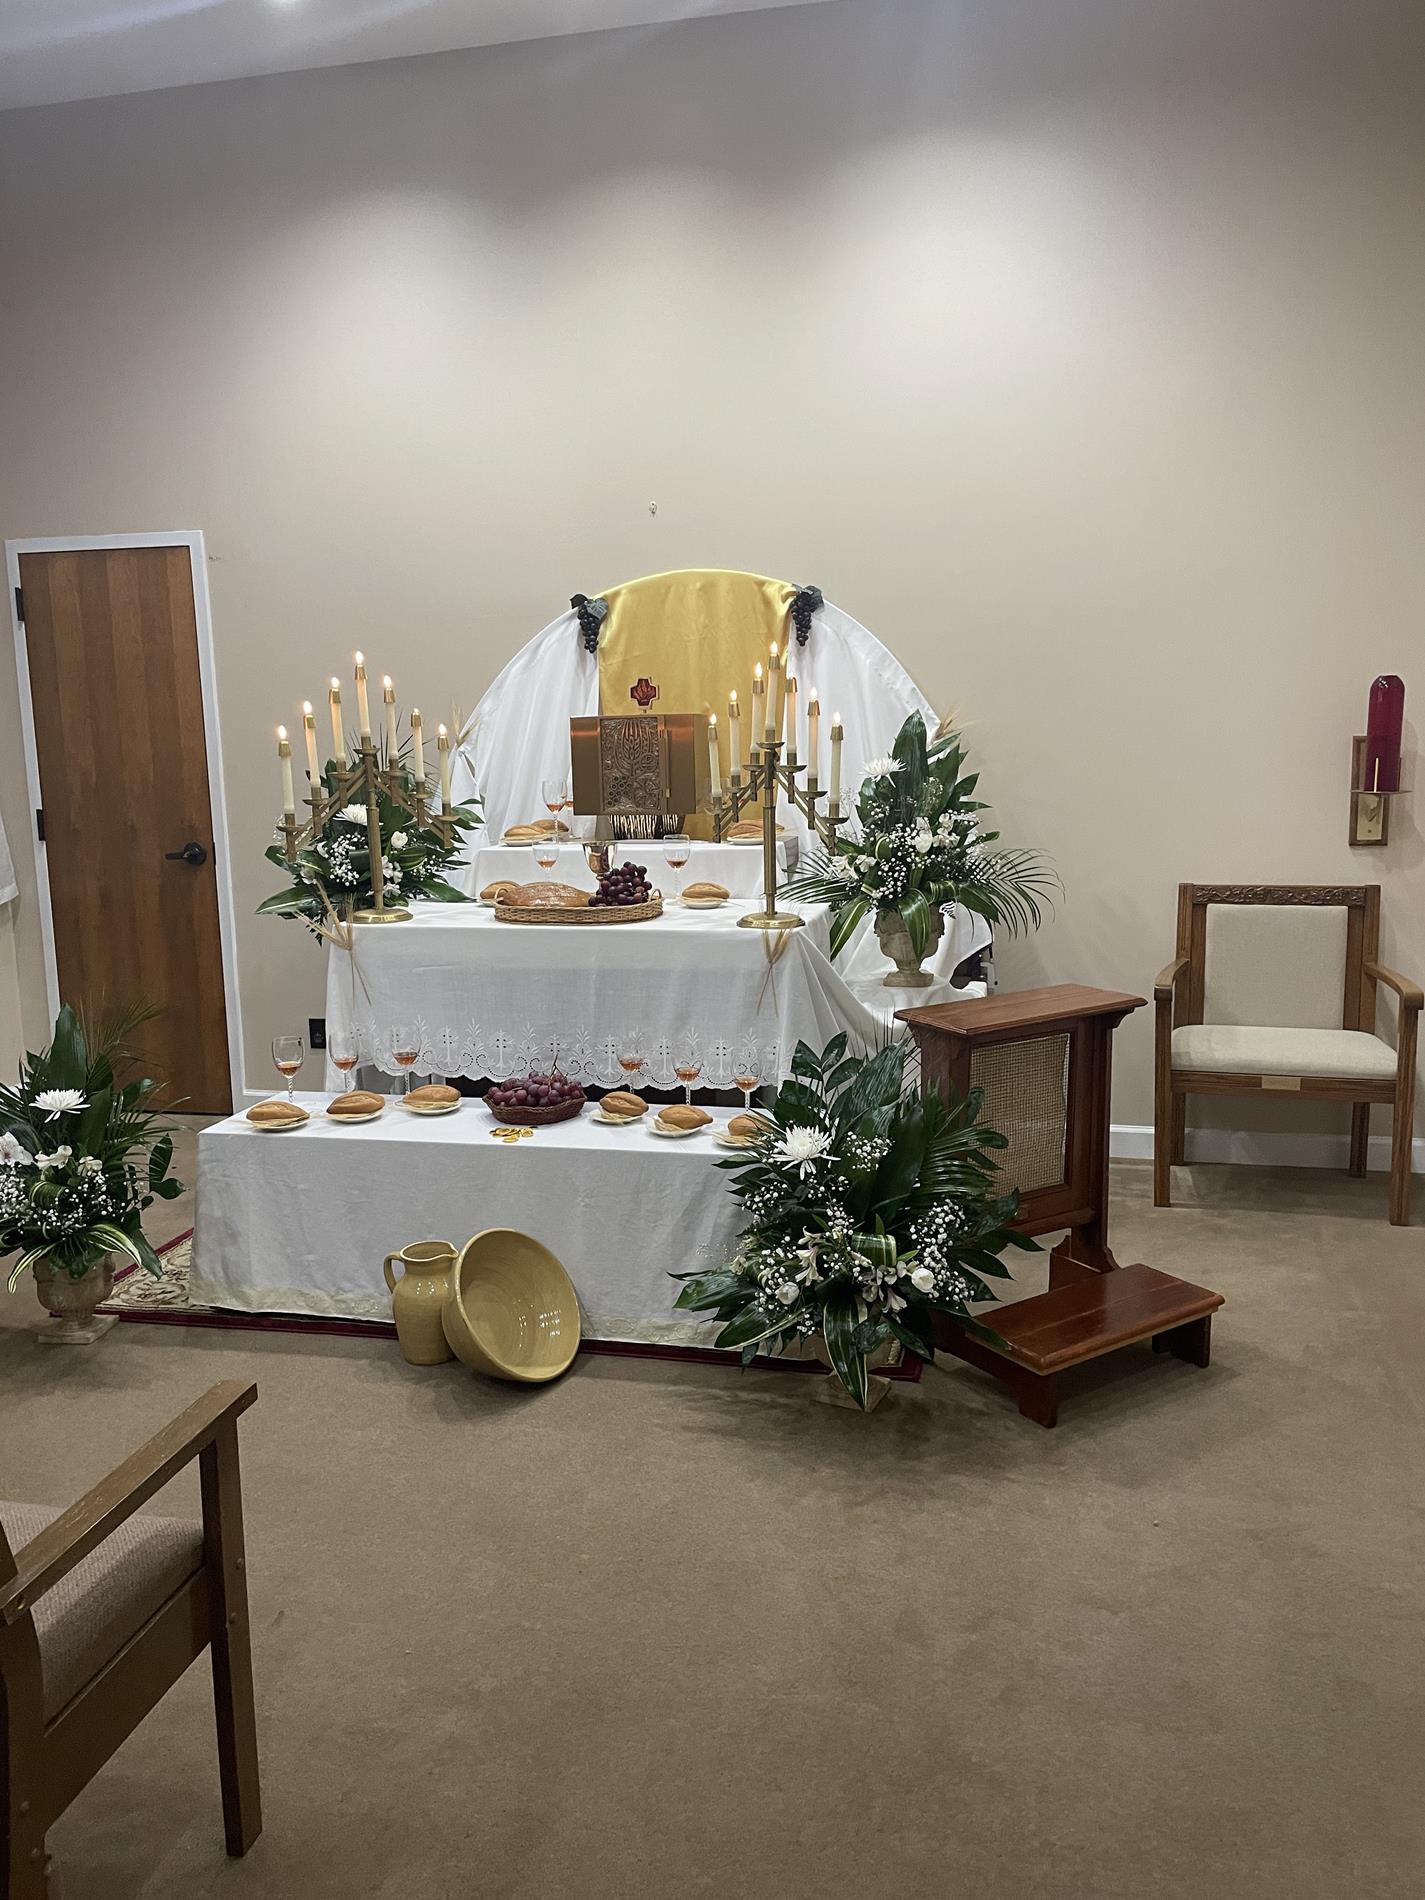 Chapel beautifully adorned for adoration